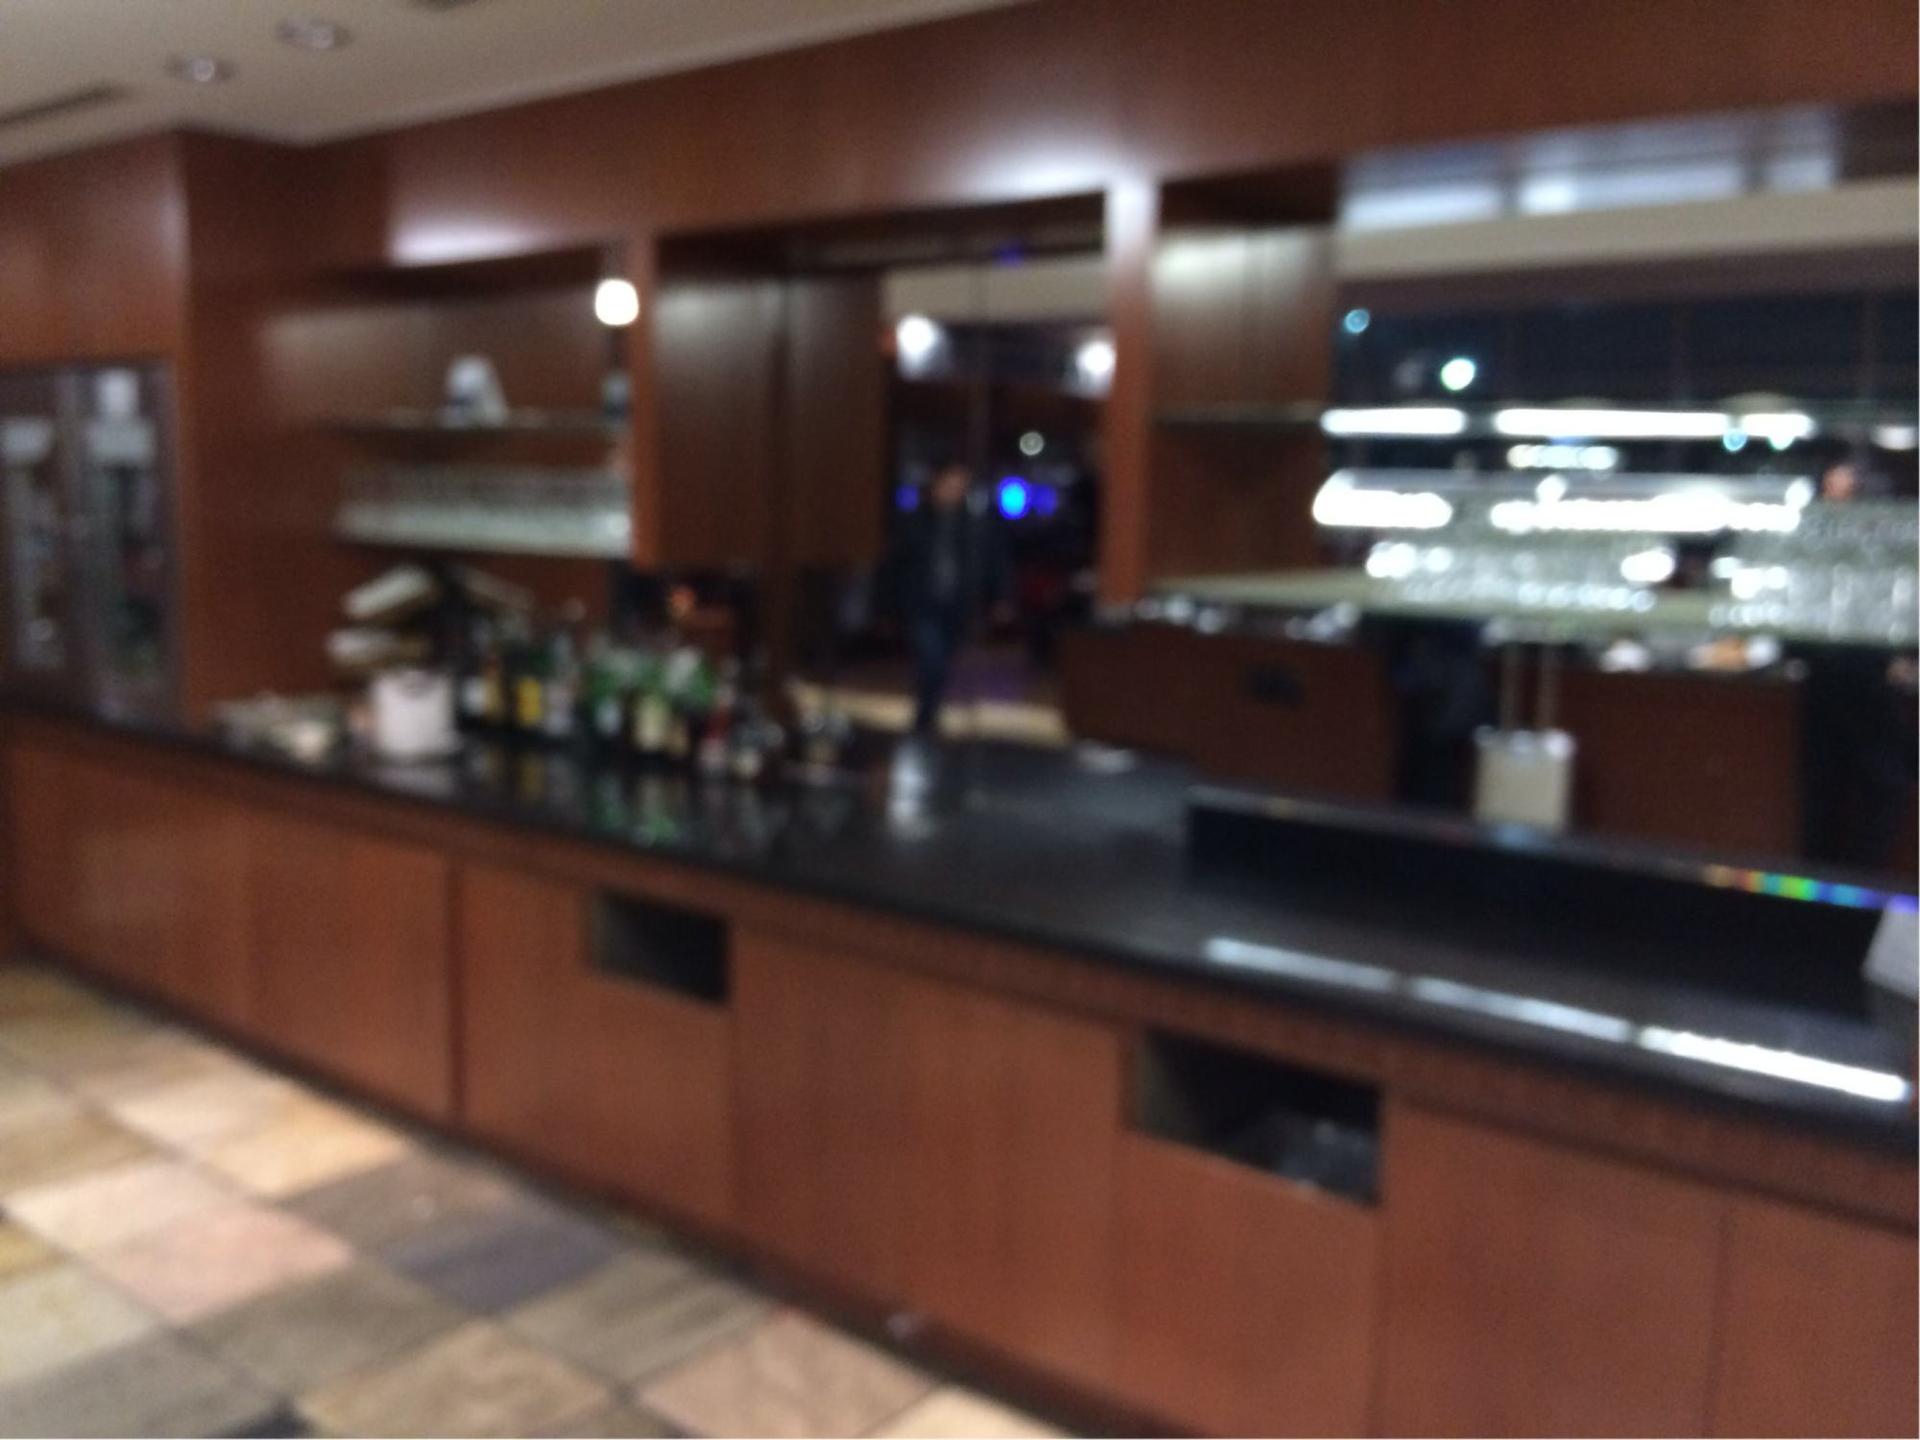 Air Canada Maple Leaf Lounge image 9 of 9